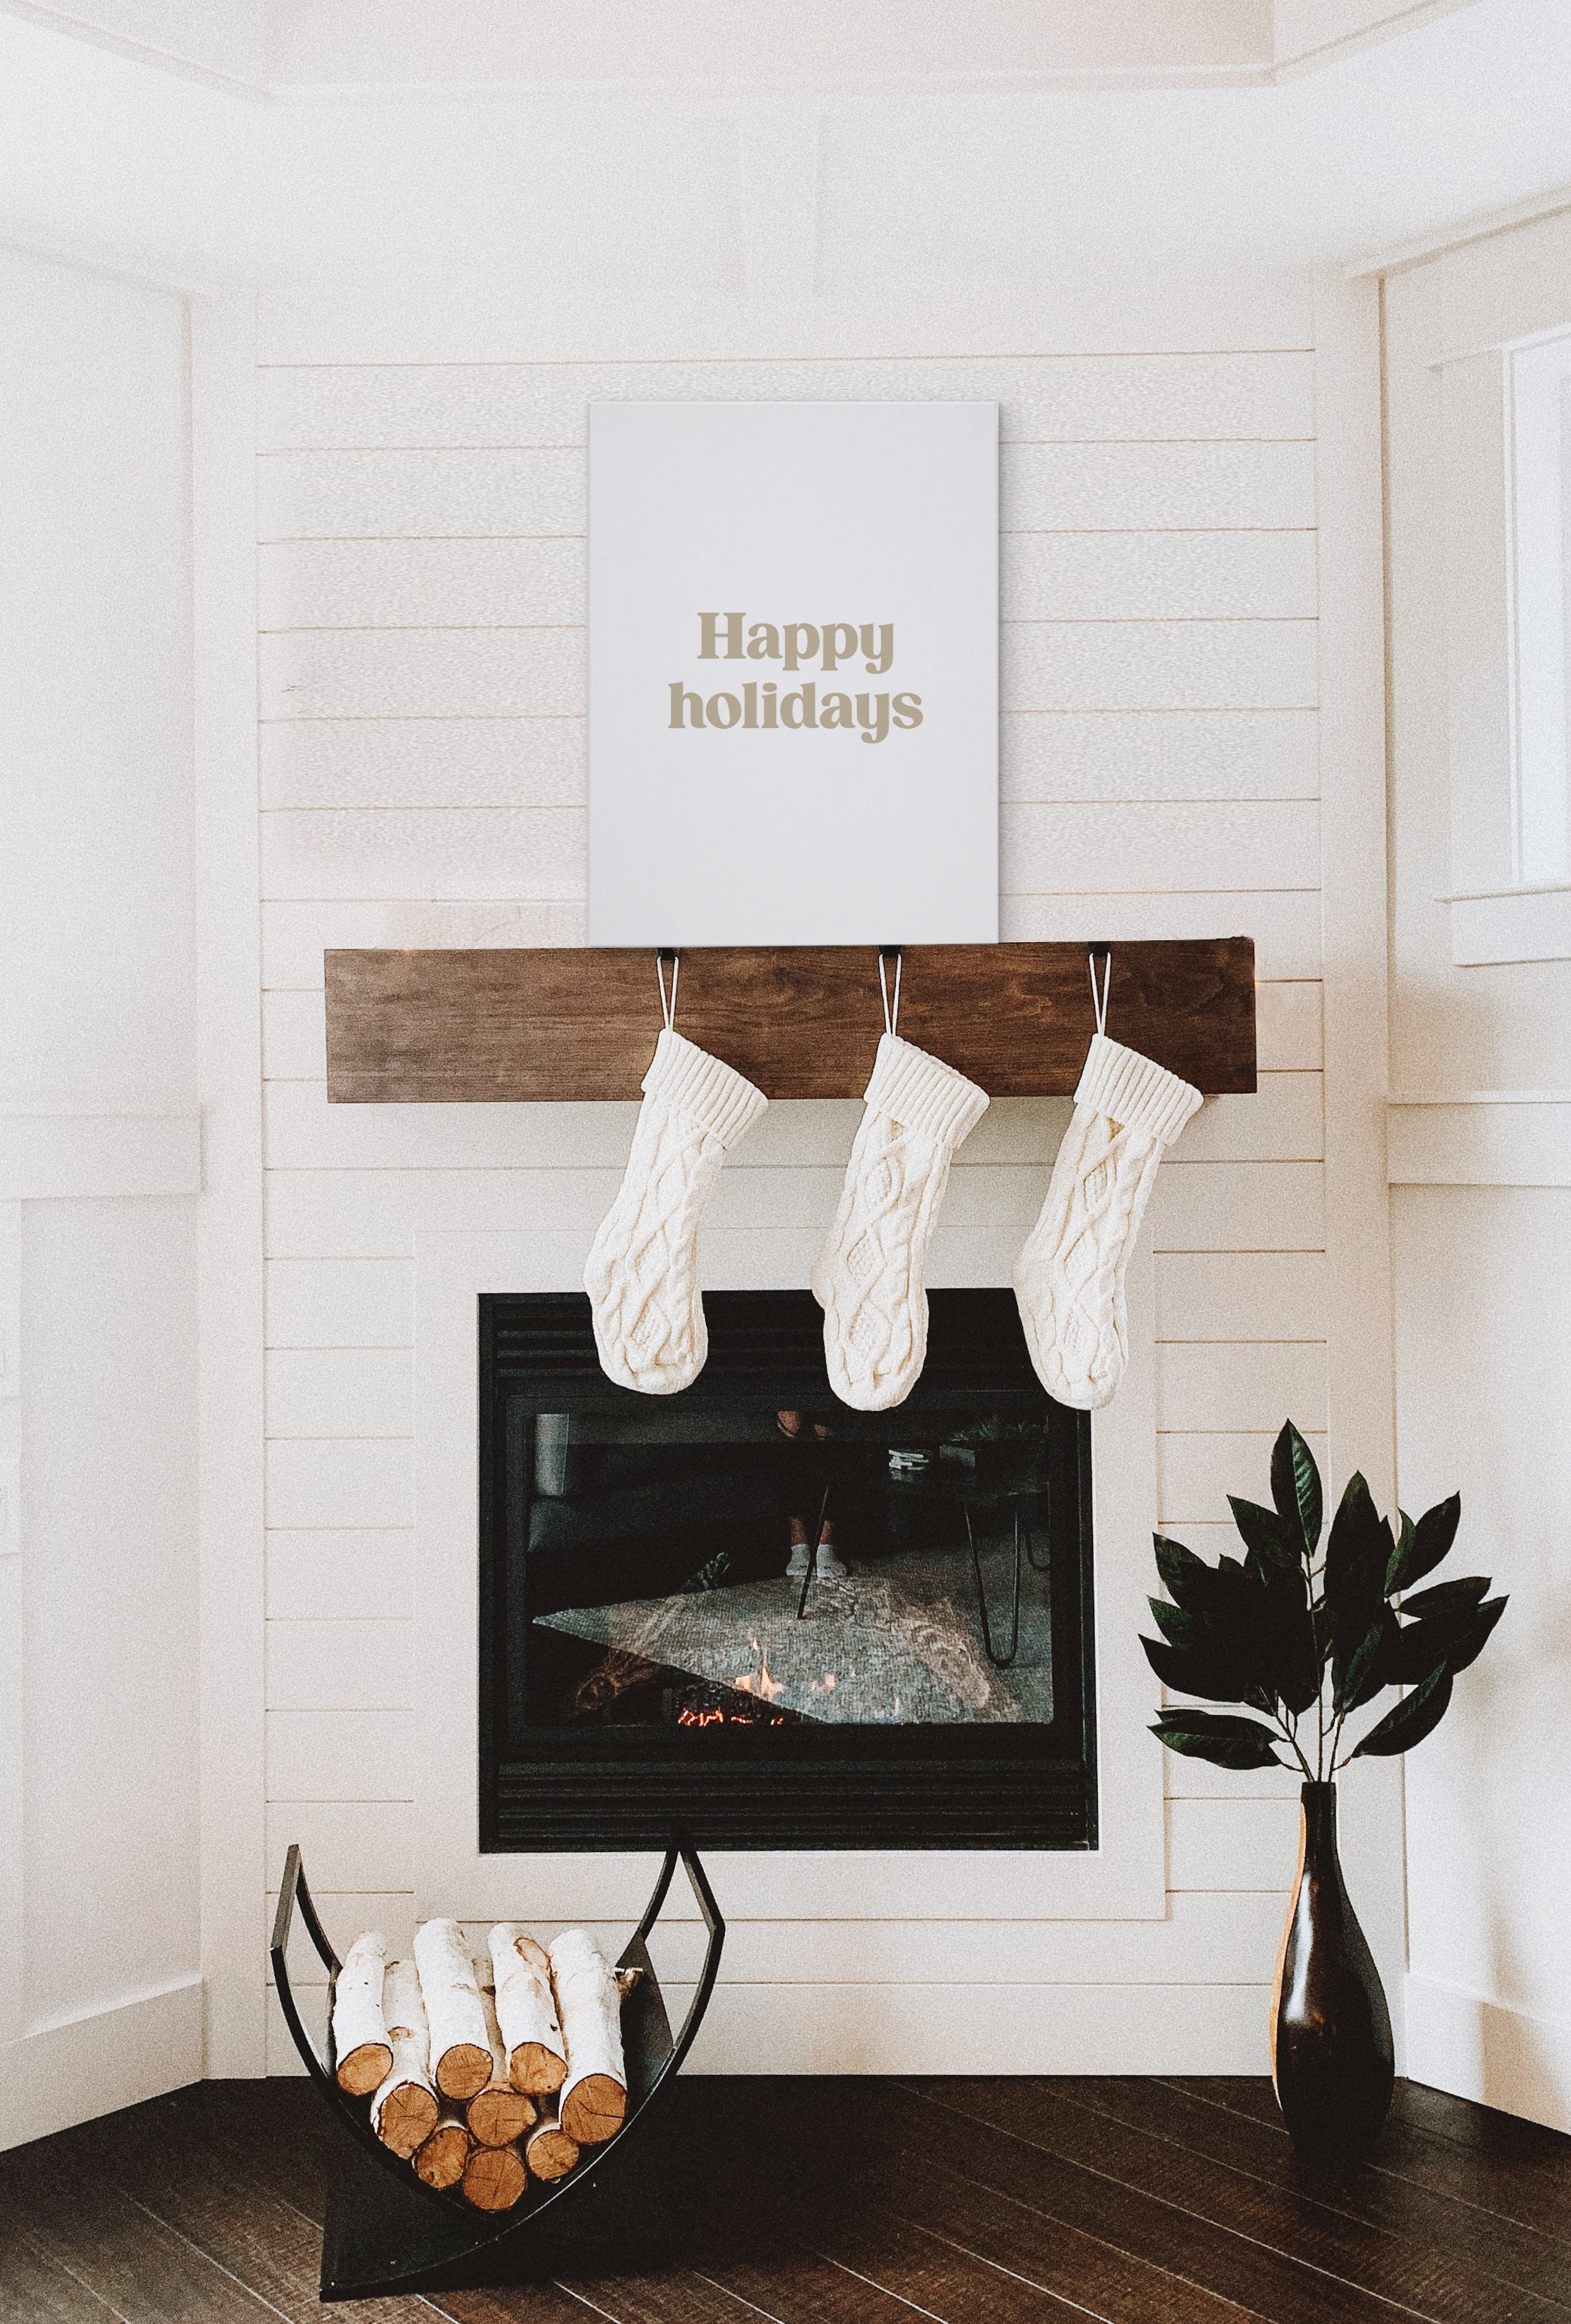 Word art print on canvas that reads: "Happy Holidays"